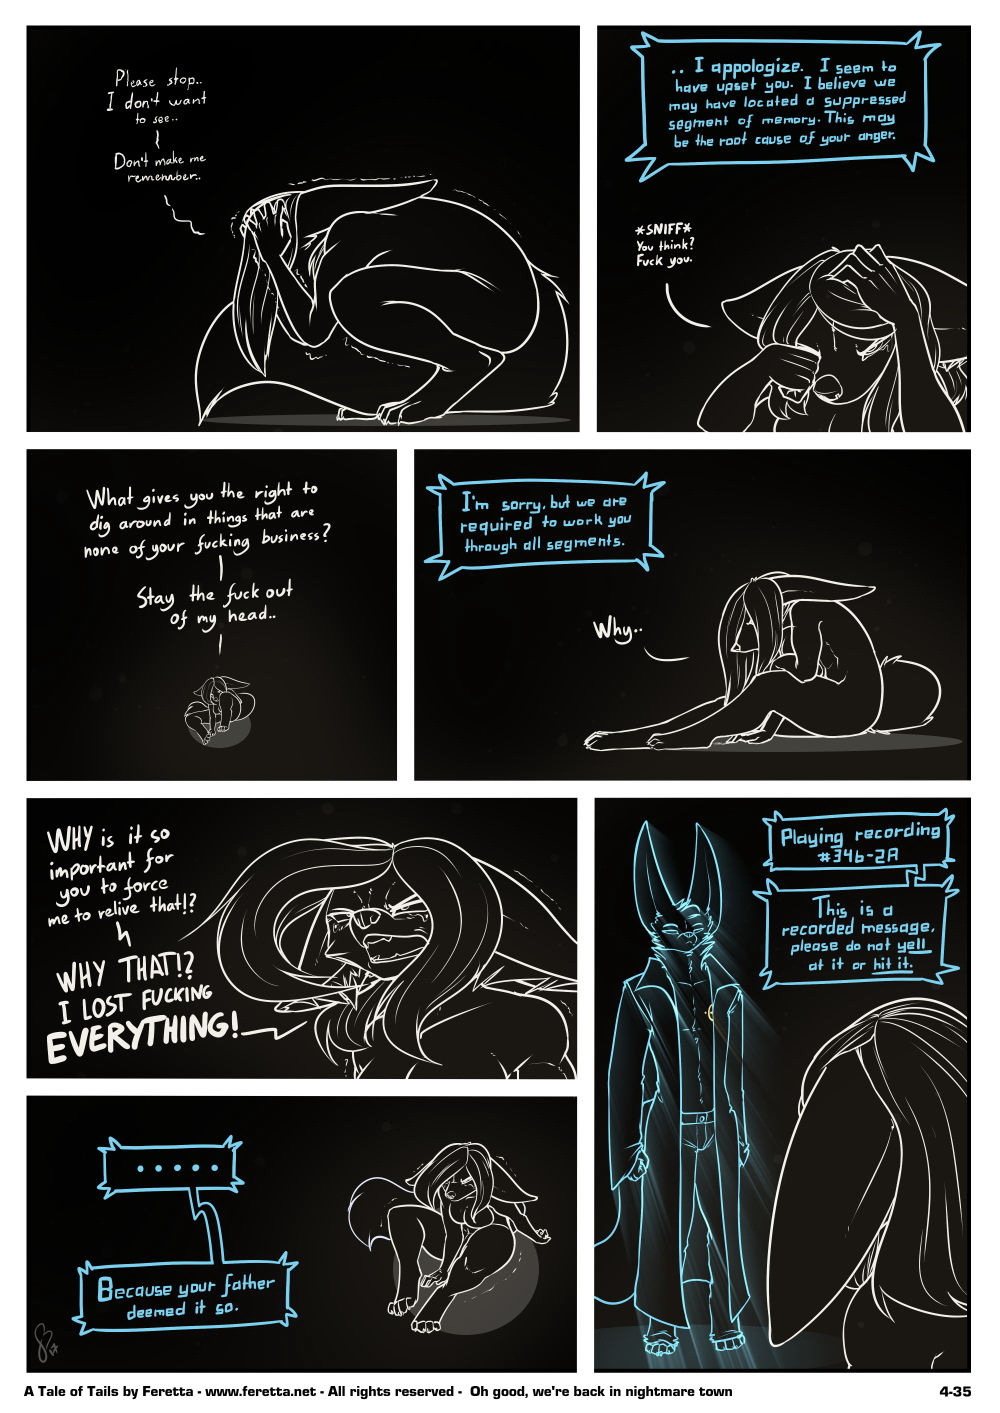 A Tale of Tails 4 - Matters of the mind - Page 35